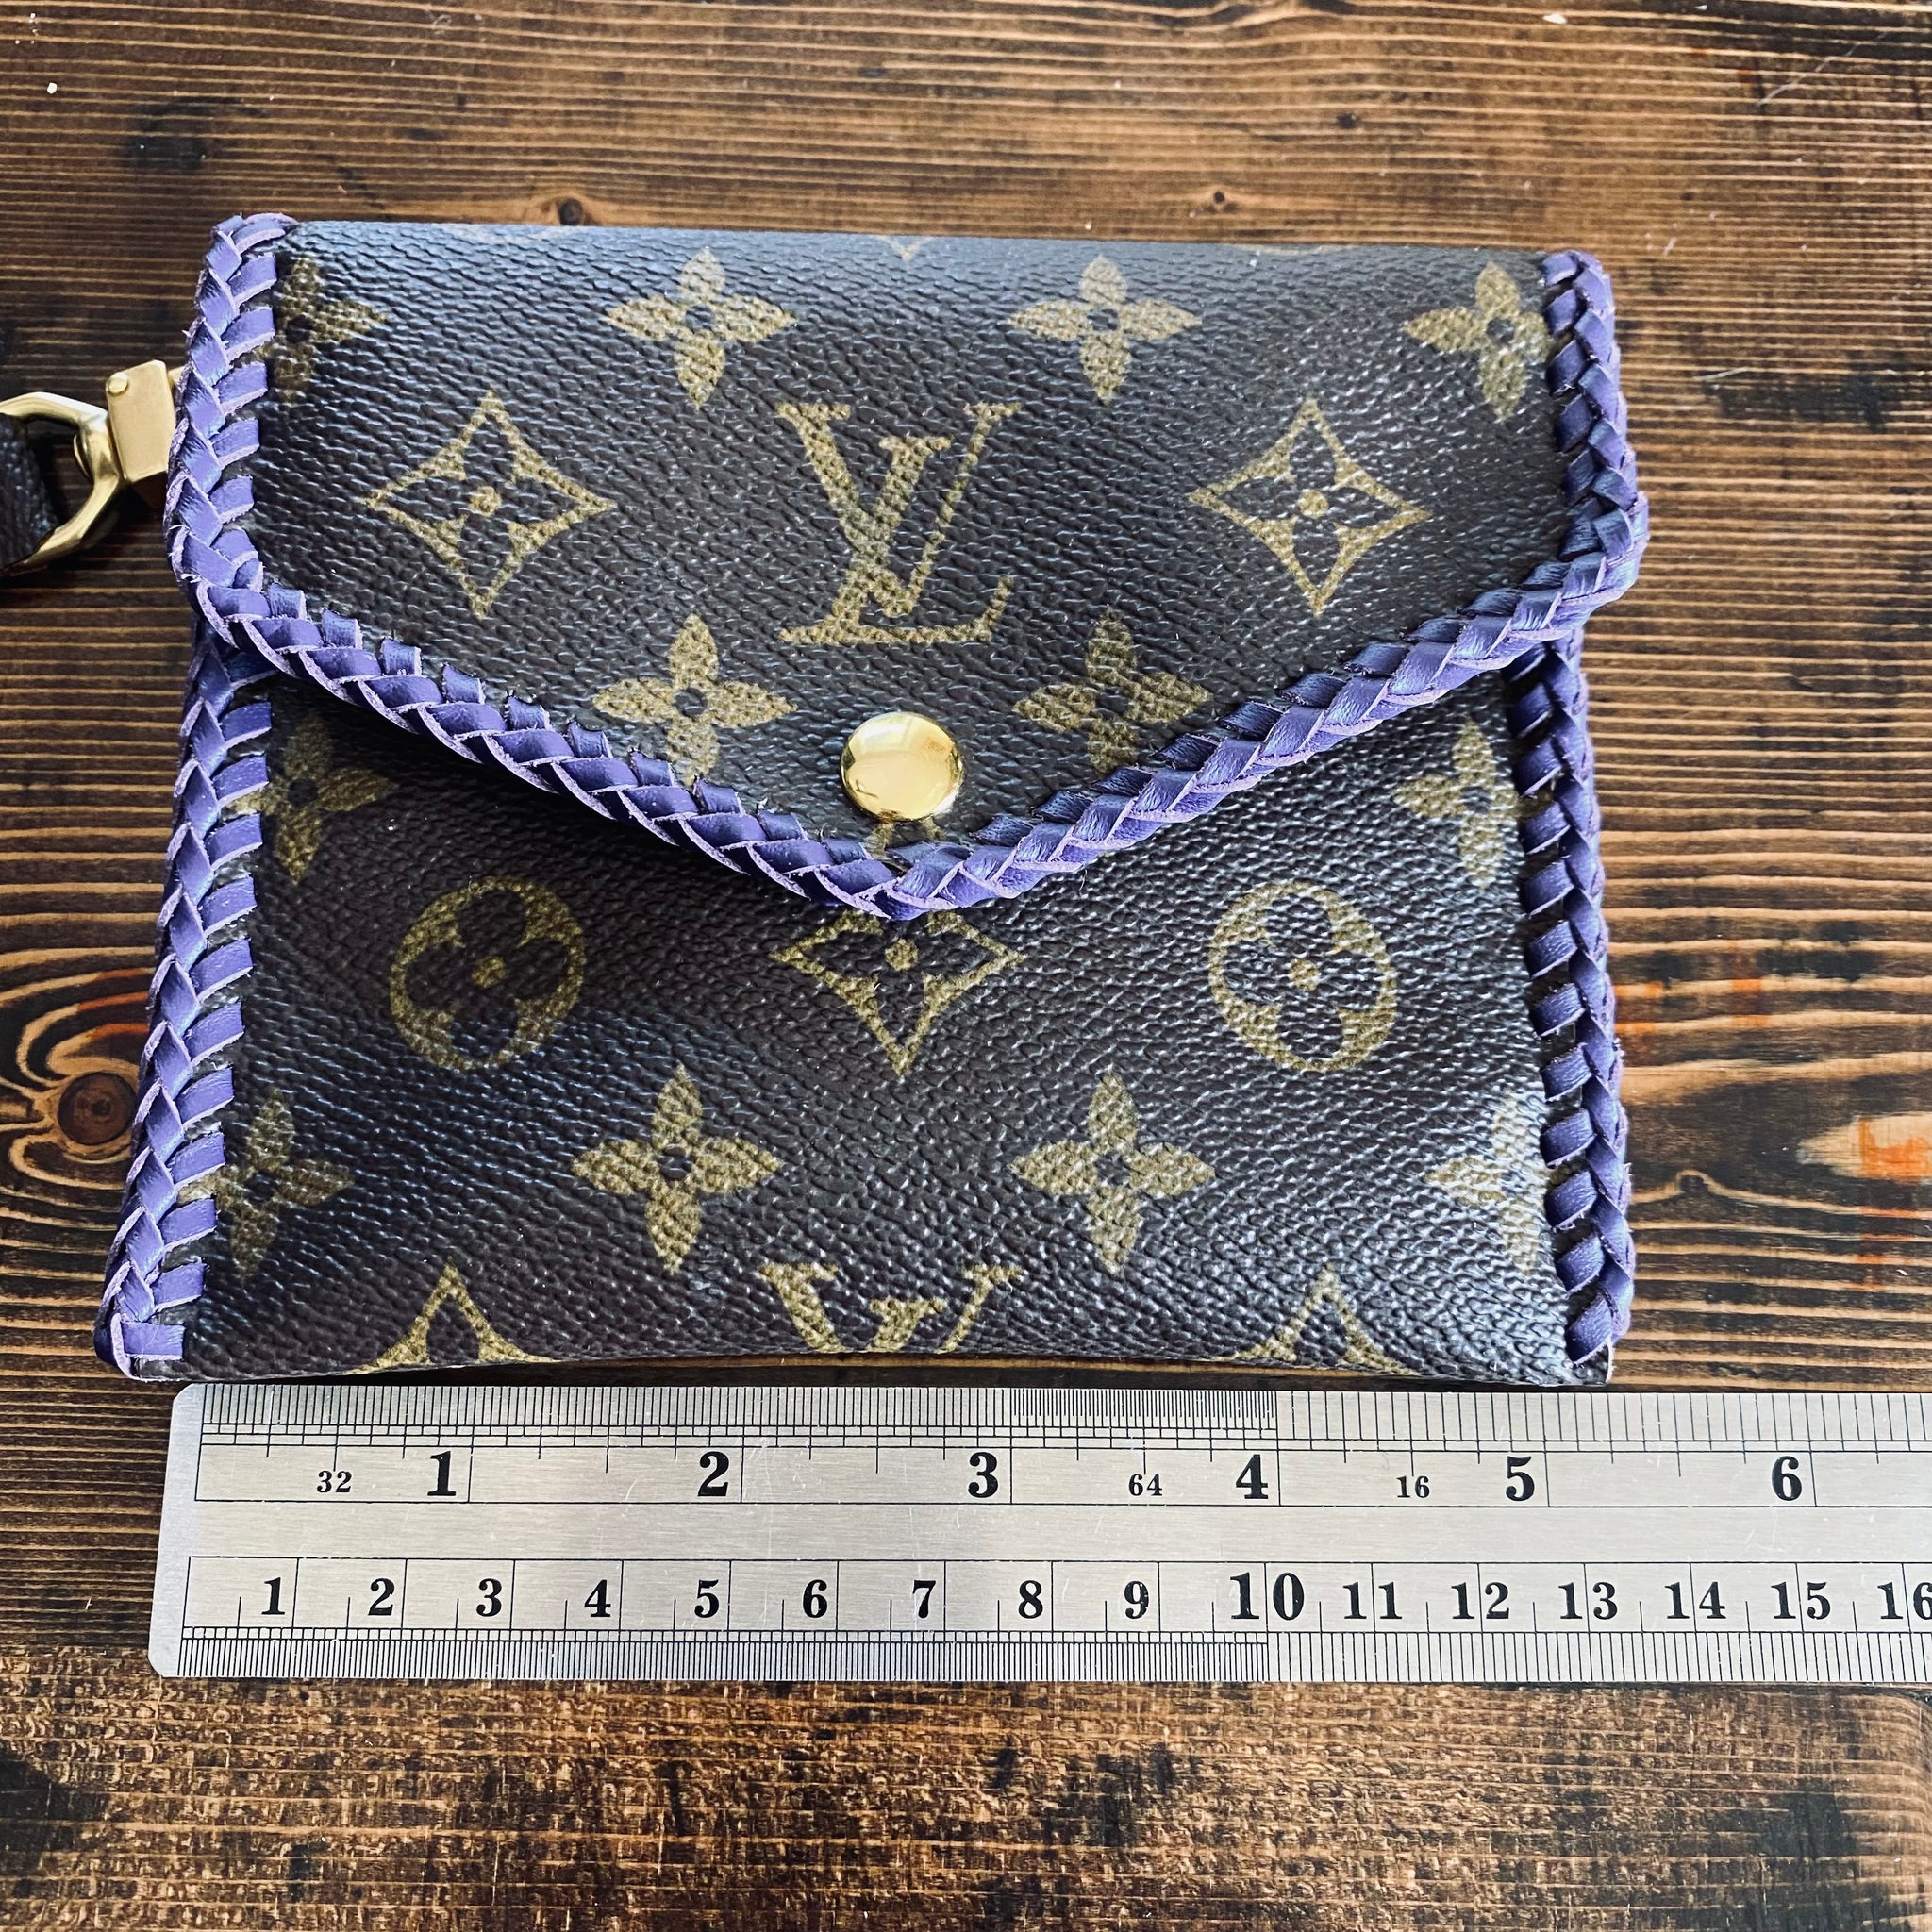 louis vuitton card holder with keychain